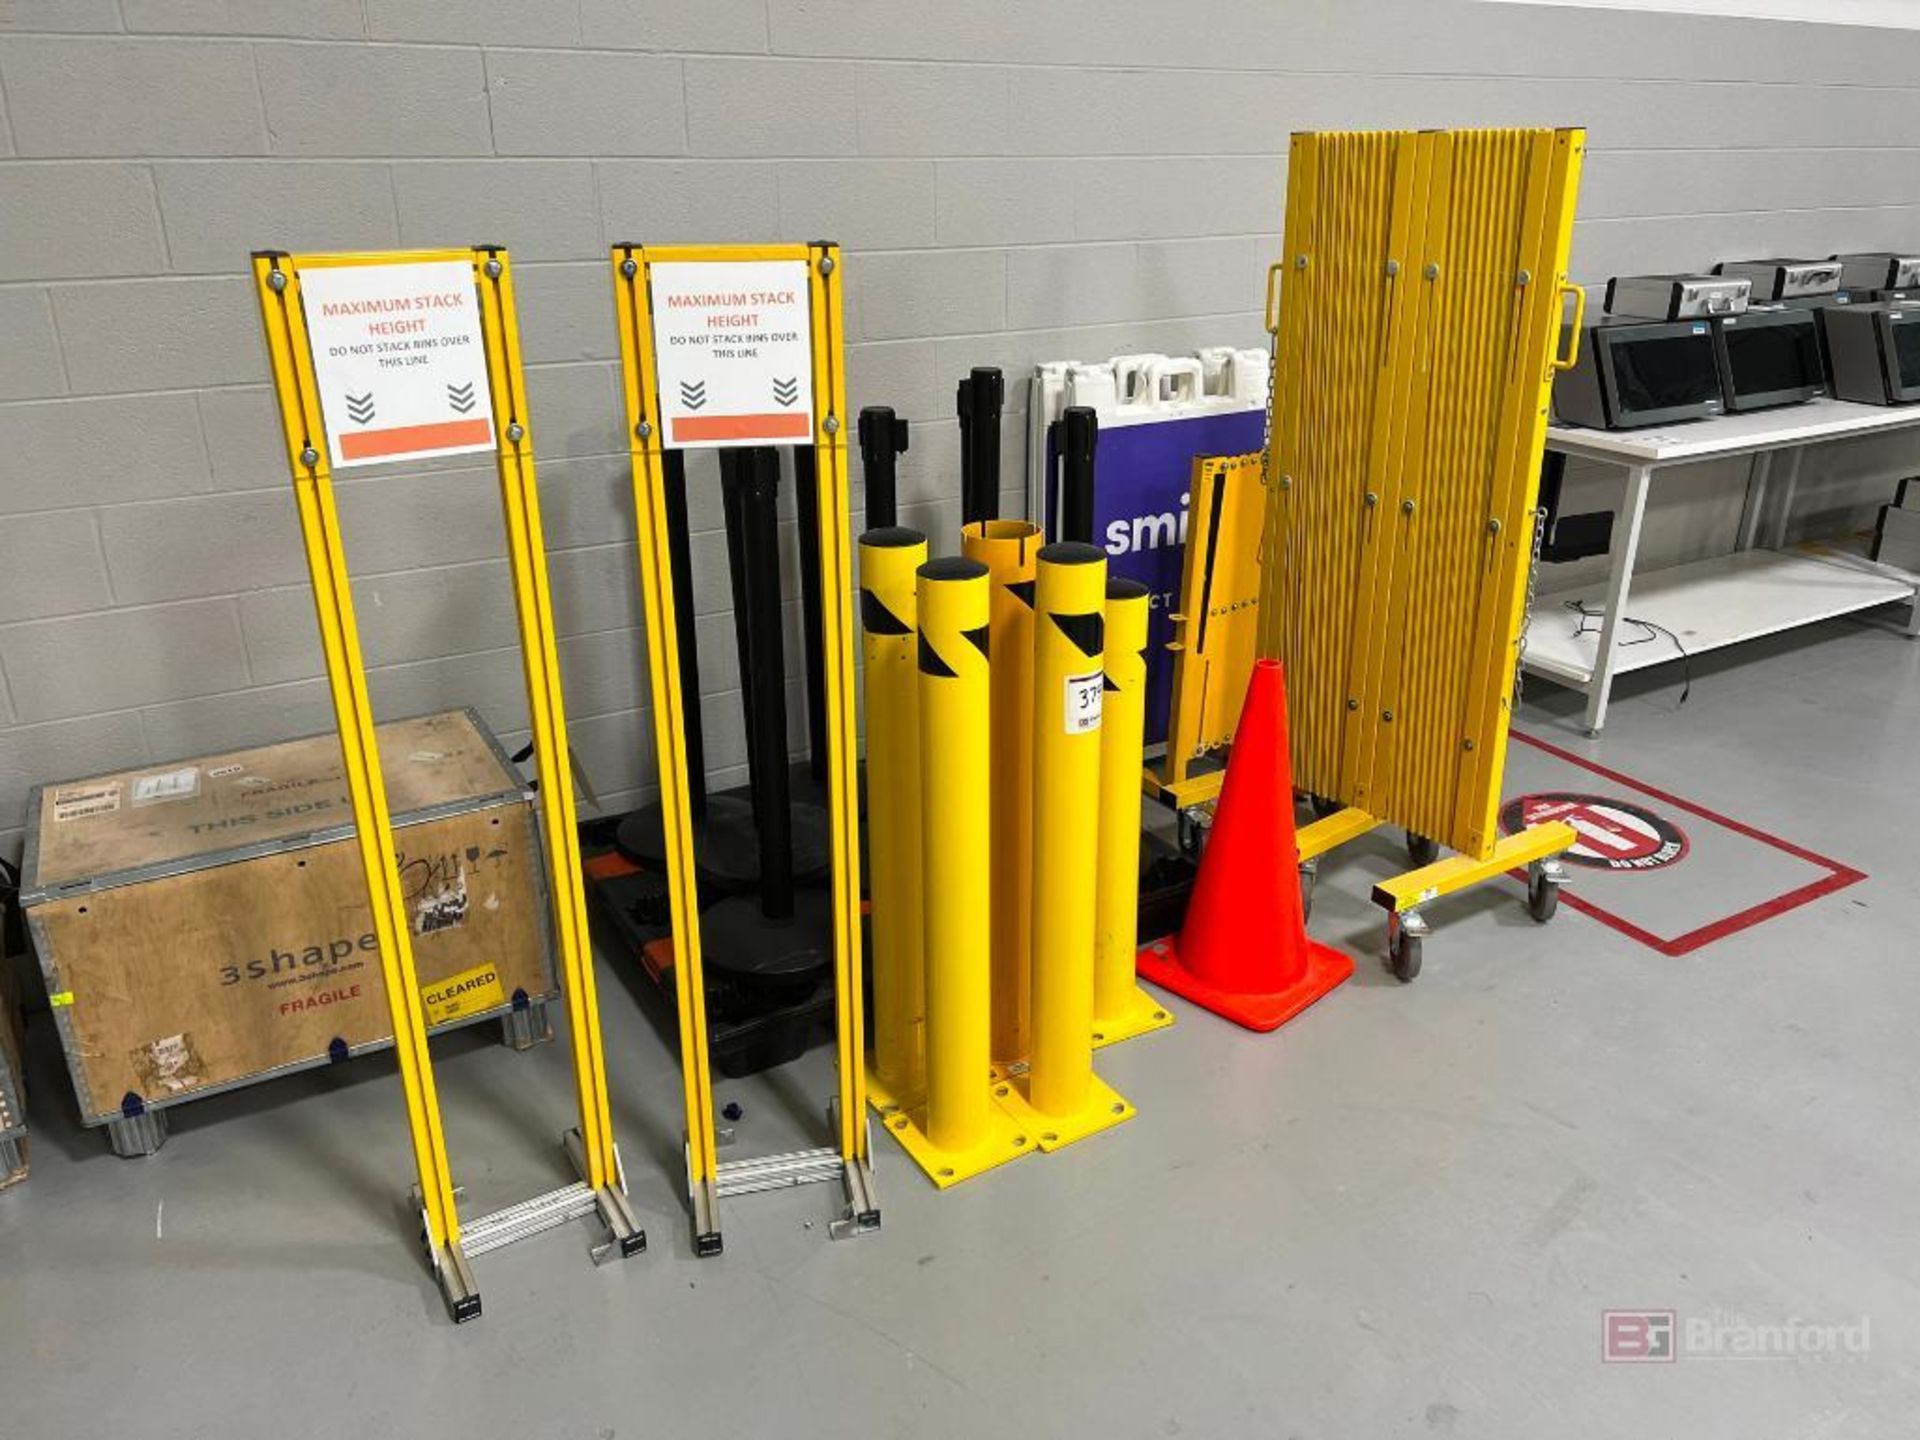 Misc. Safety Barriers